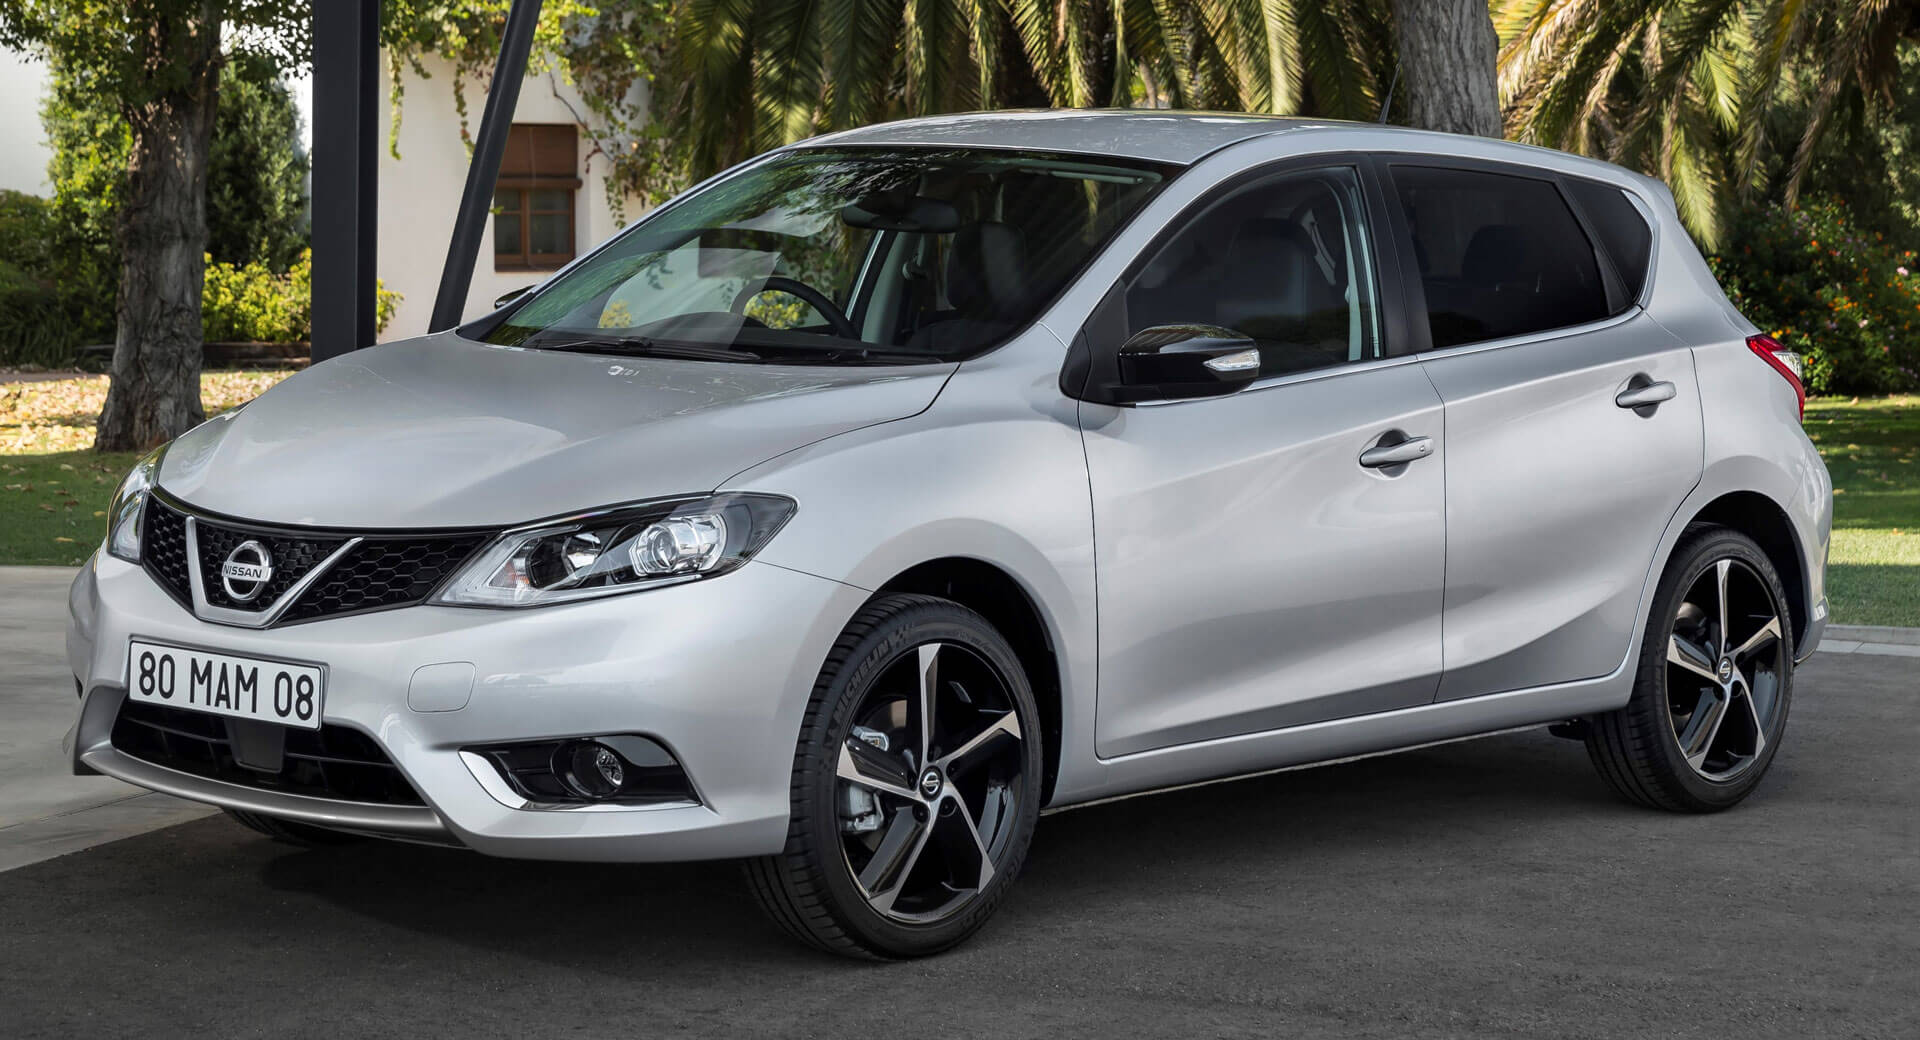 Pulsar Pulses Its Way Out Of Nissan’s UK Lineup Carscoops